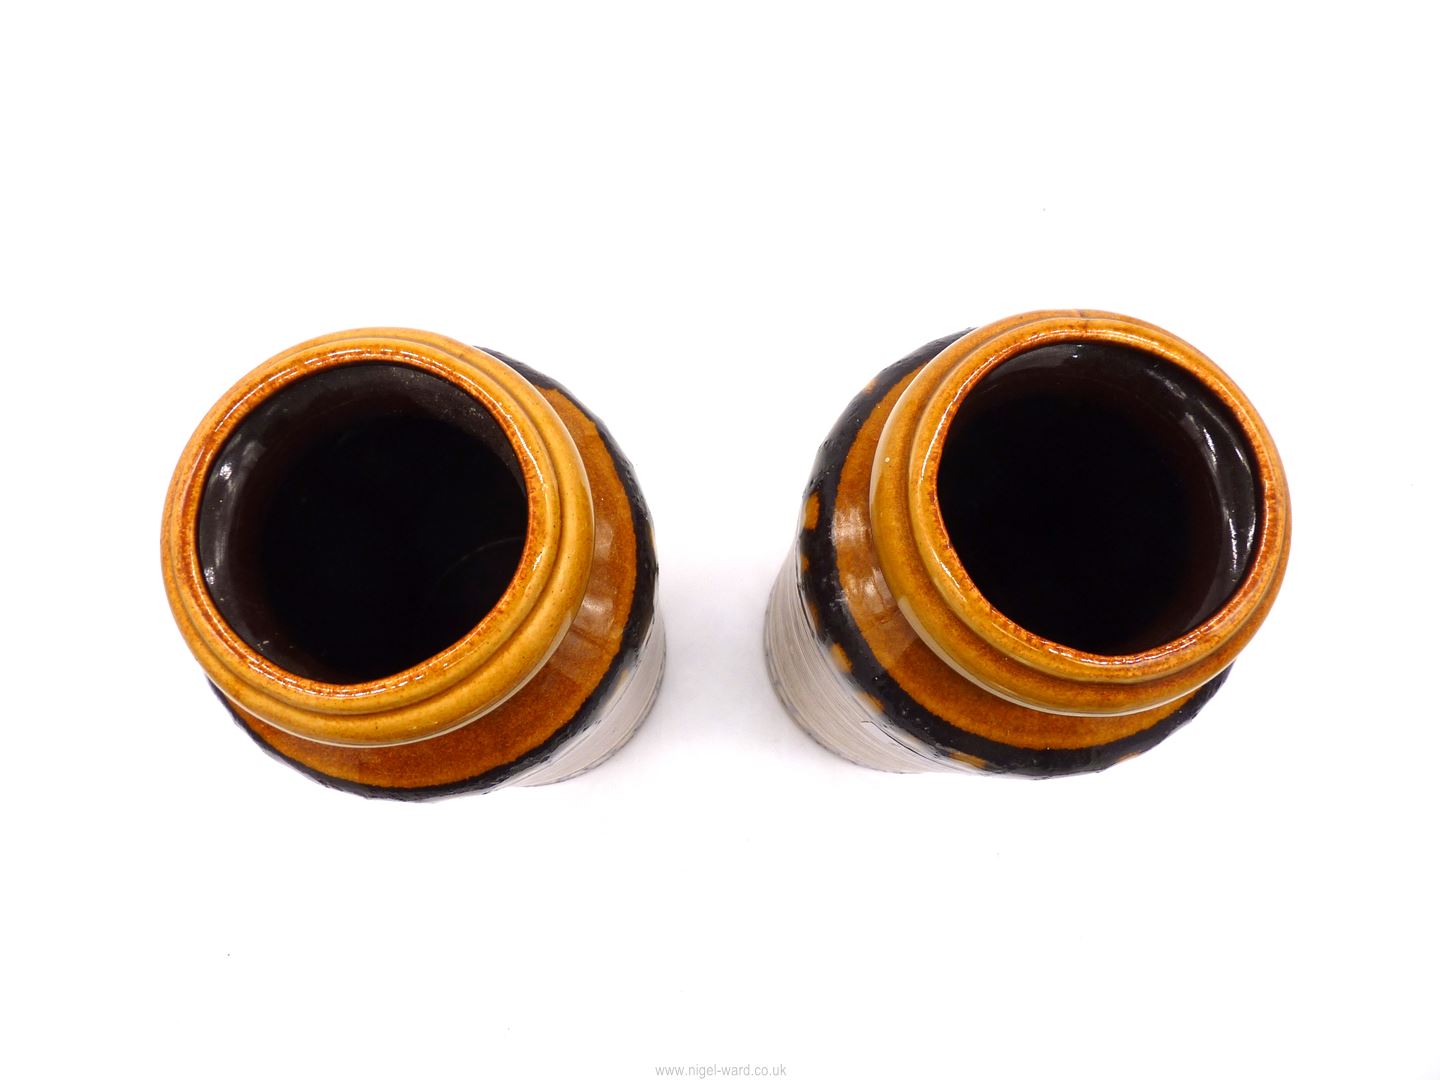 A pair of German Vases, no.. 517-30, 12" tall, in browns and black colourway. - Image 2 of 3